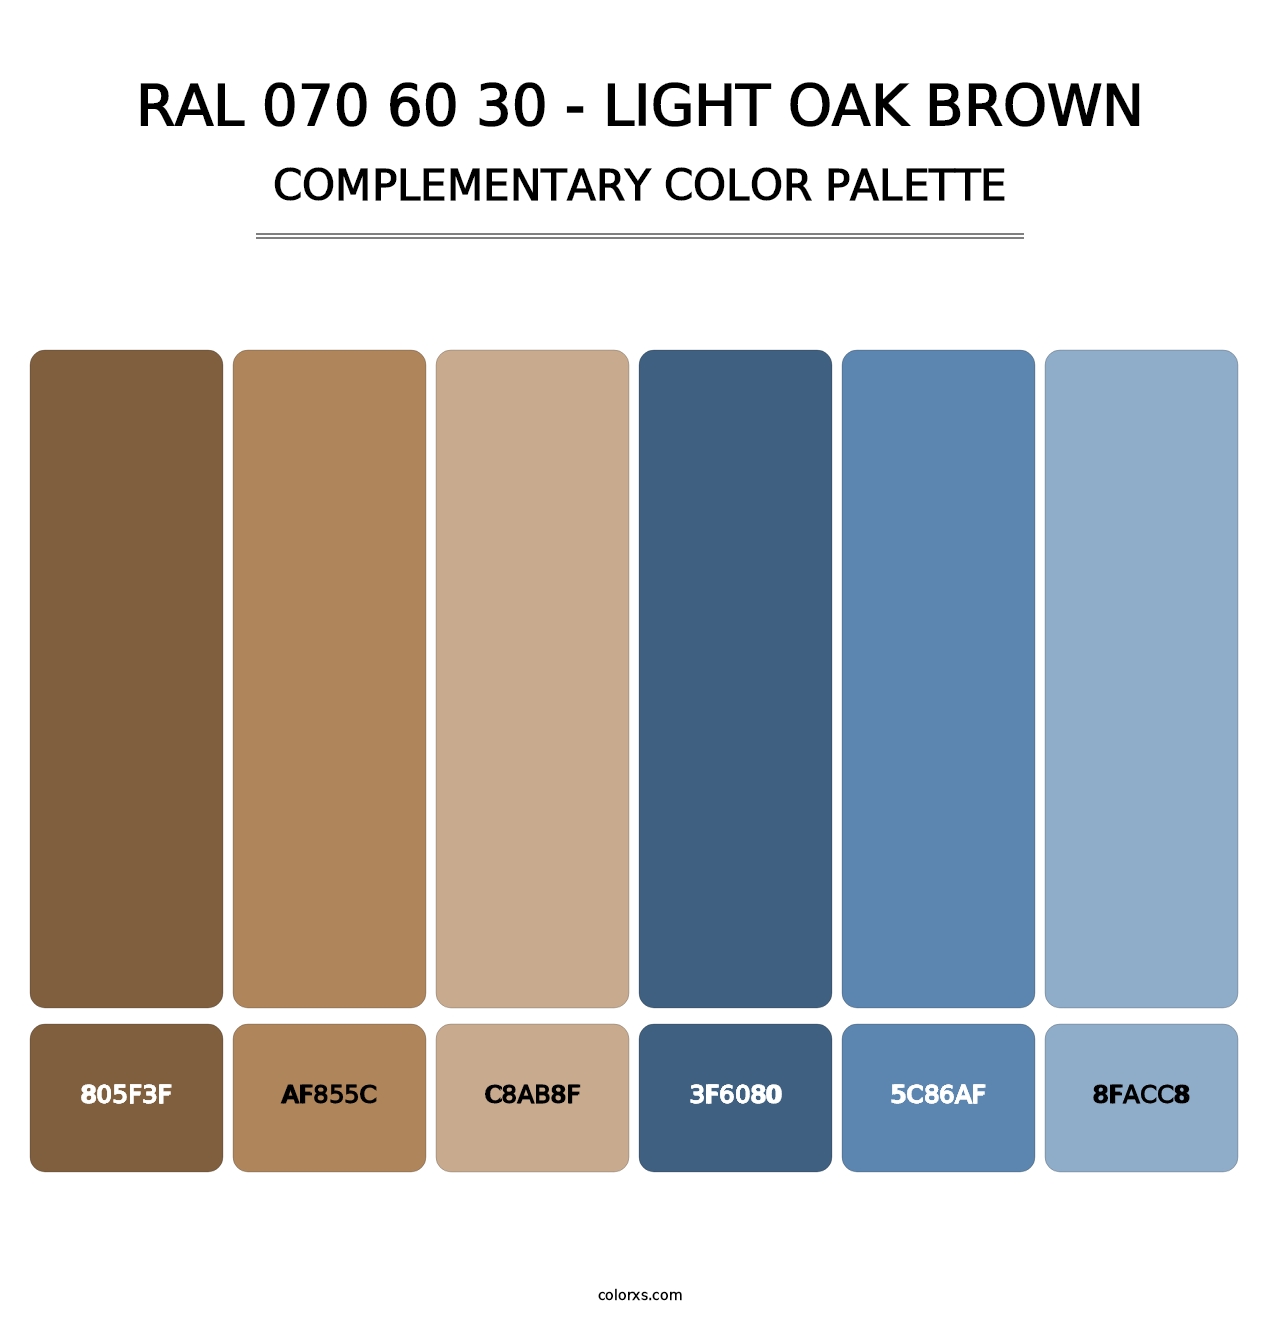 RAL 070 60 30 - Light Oak Brown - Complementary Color Palette